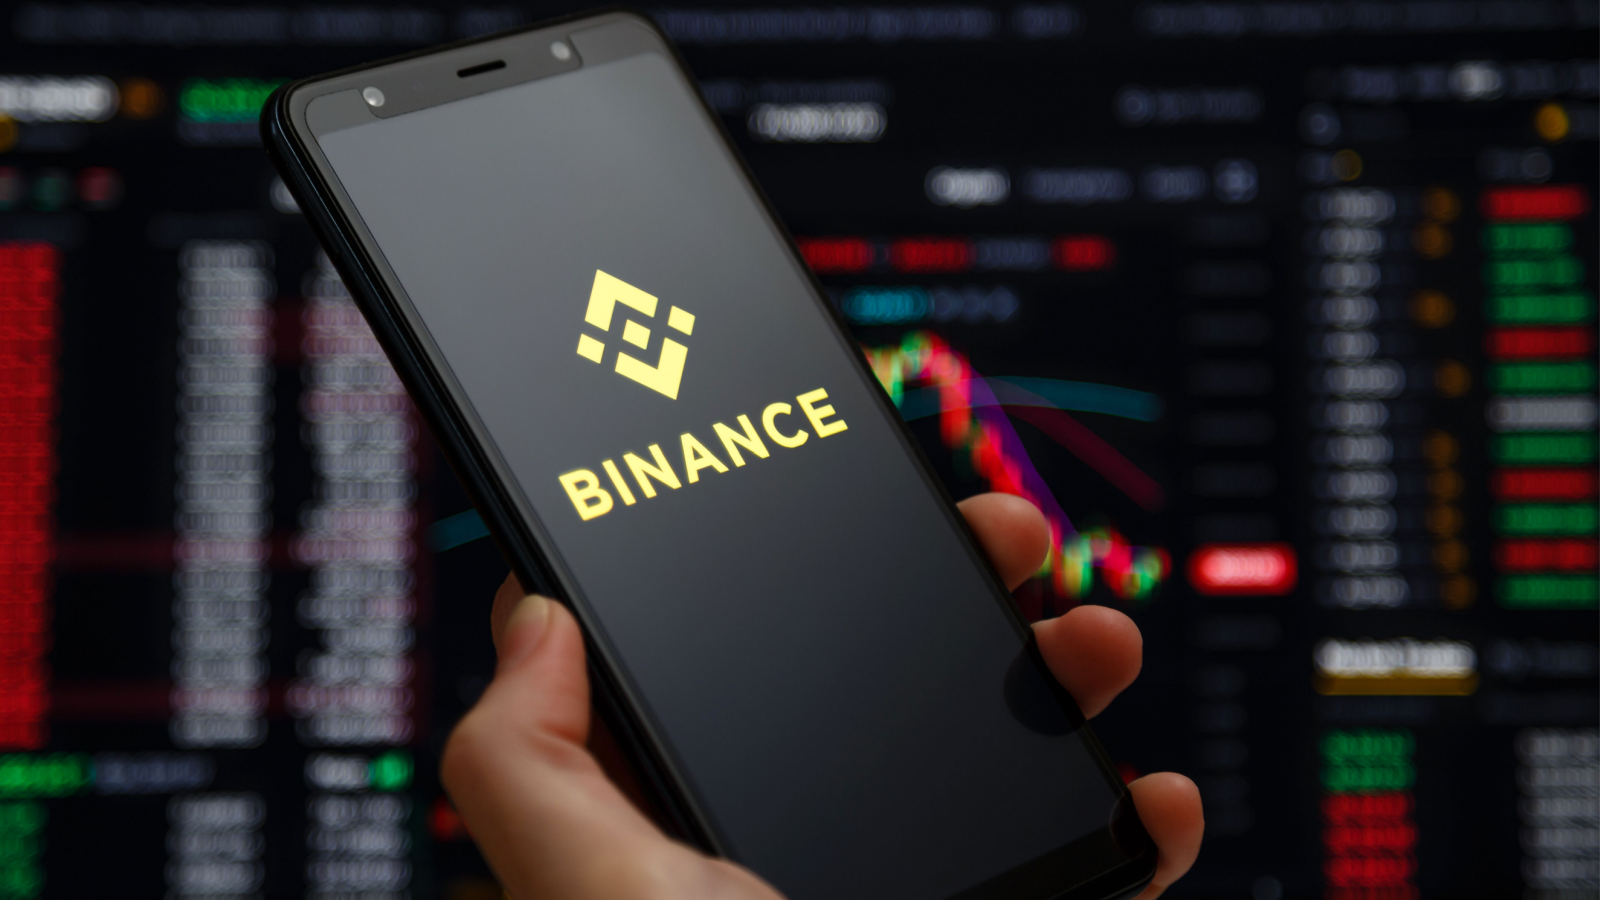 Binance.US mobile app running at smartphone screen with a trading page at background. Binance one of the world's leading cryptocurrency exchange and trading platform.